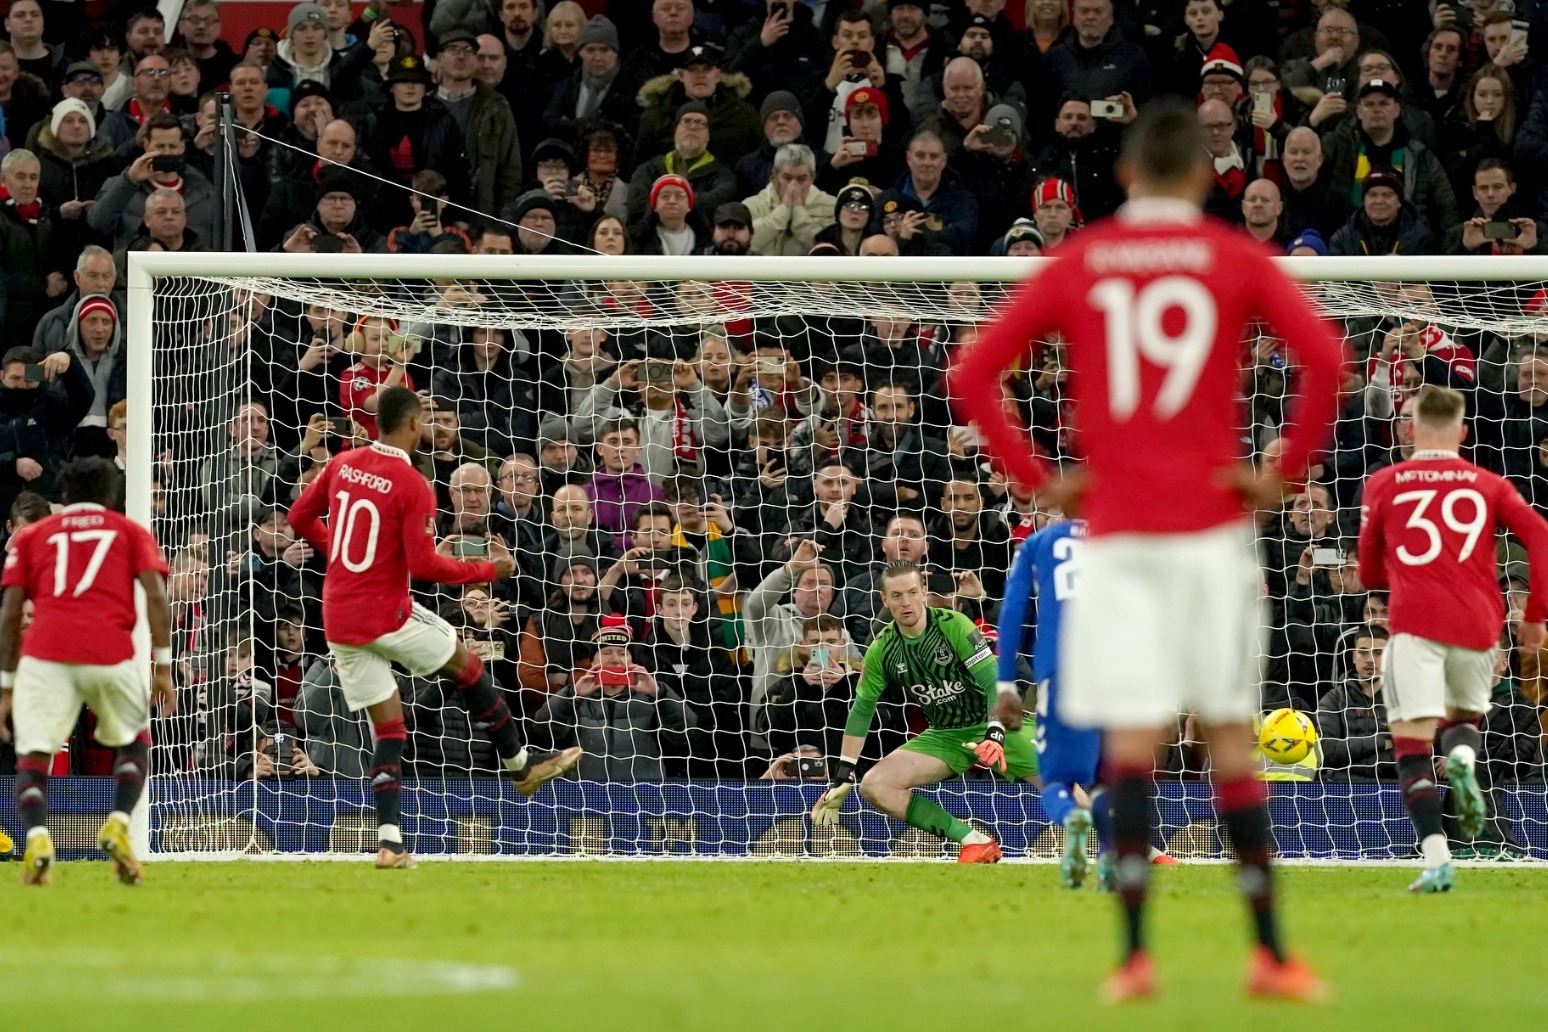 Marcus Rashford hot streak continues as Manchester United beat Everton in FA Cup 